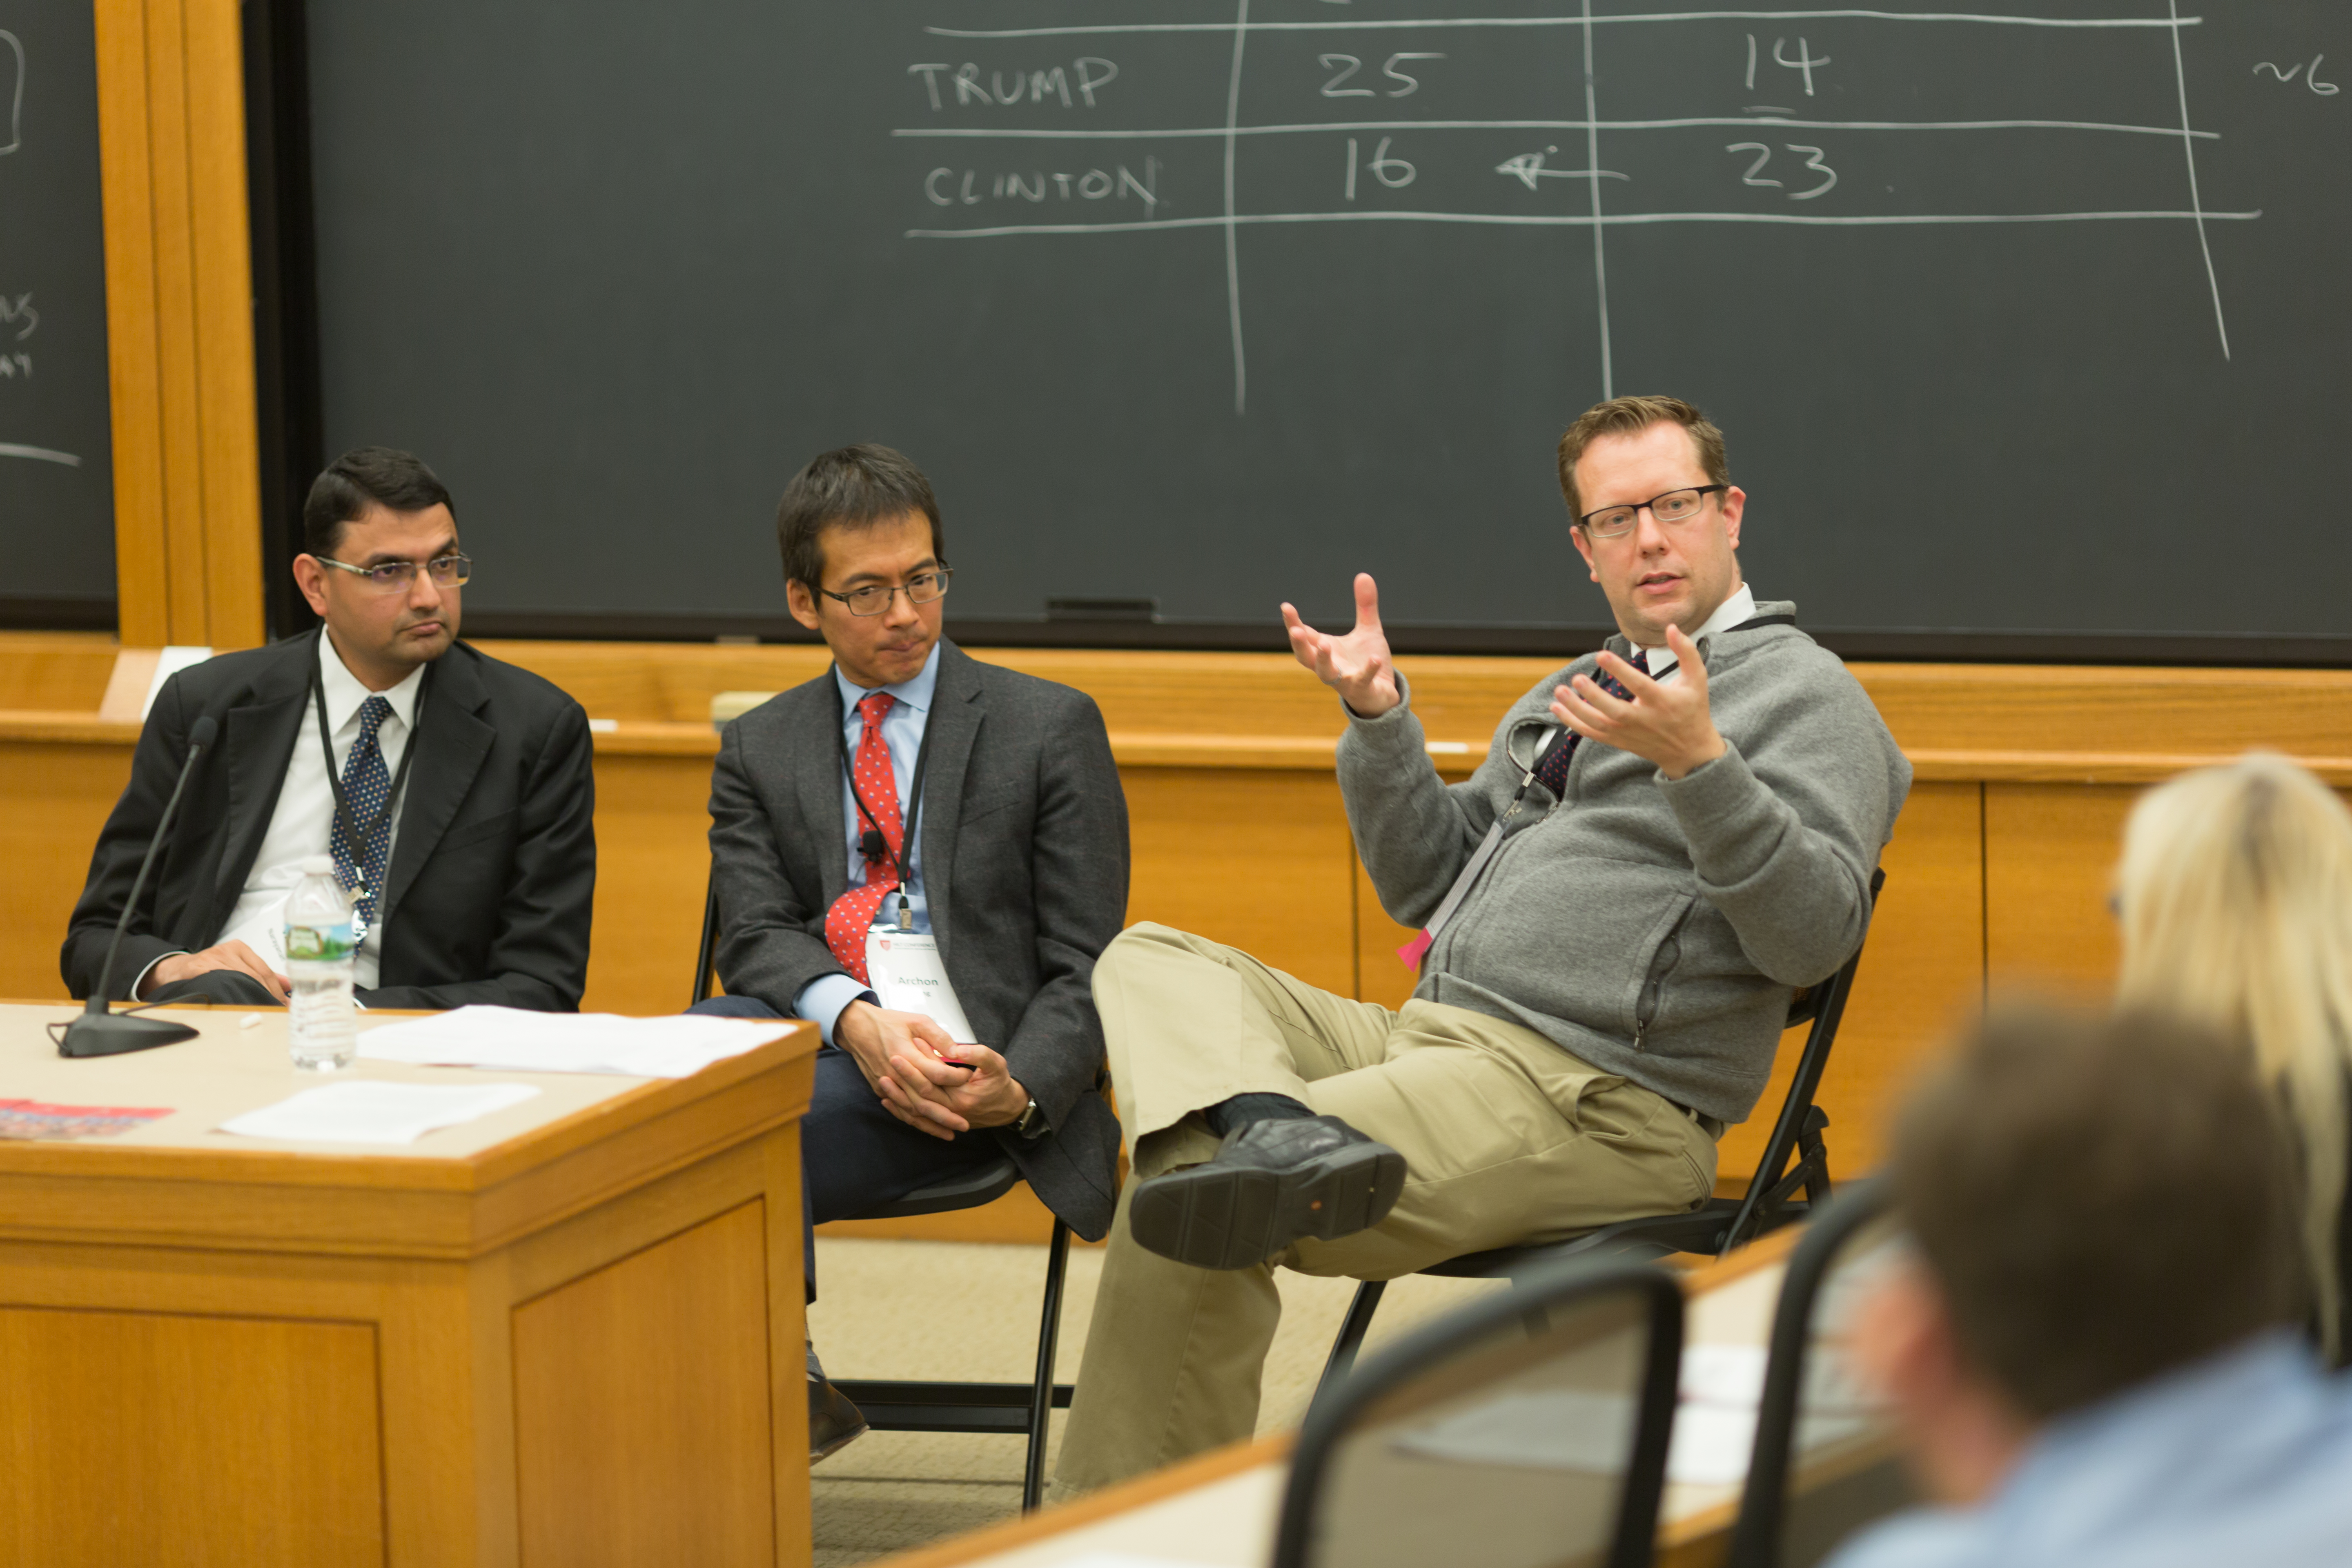 Professor V.G. Narayanan, Professor Archon Fung, and Associate Dean for Learning and Teaching Matt Miller speak to attendees in breakout session "Case teaching as practiced across disciplines and professions at Harvard."